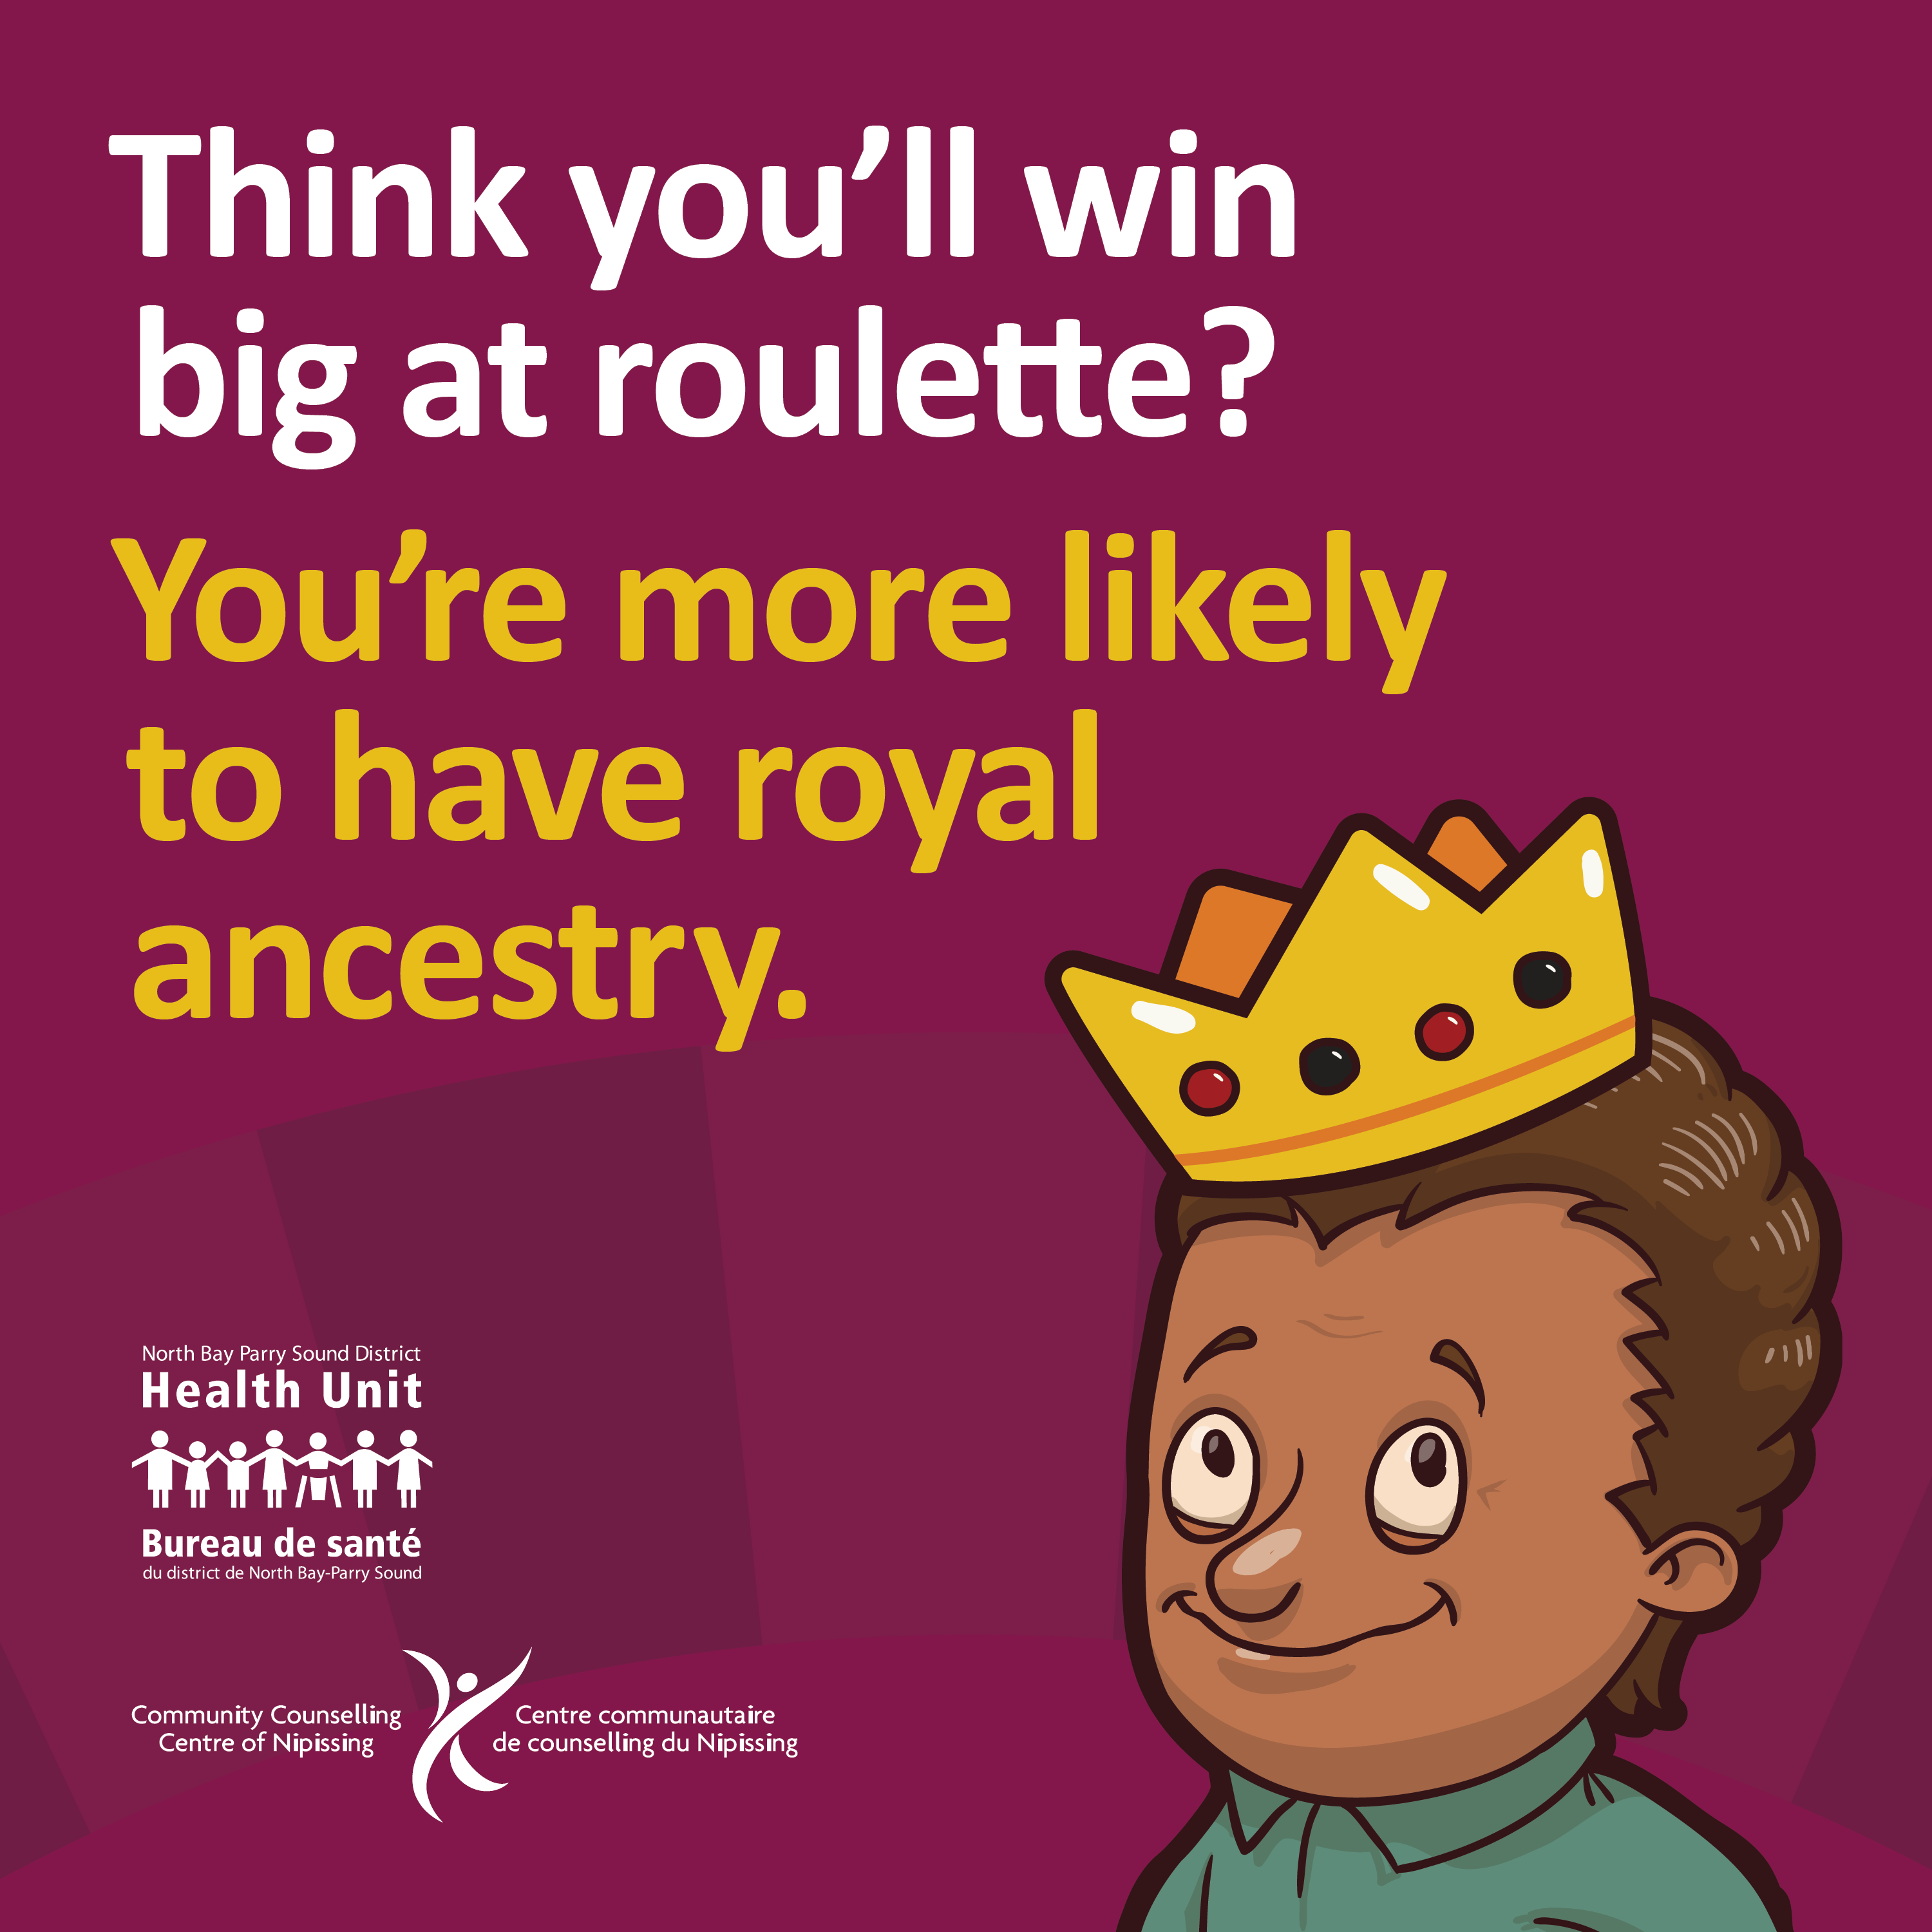 • Think You’ll win big at roulette? You’re more likely to have royal ancestry